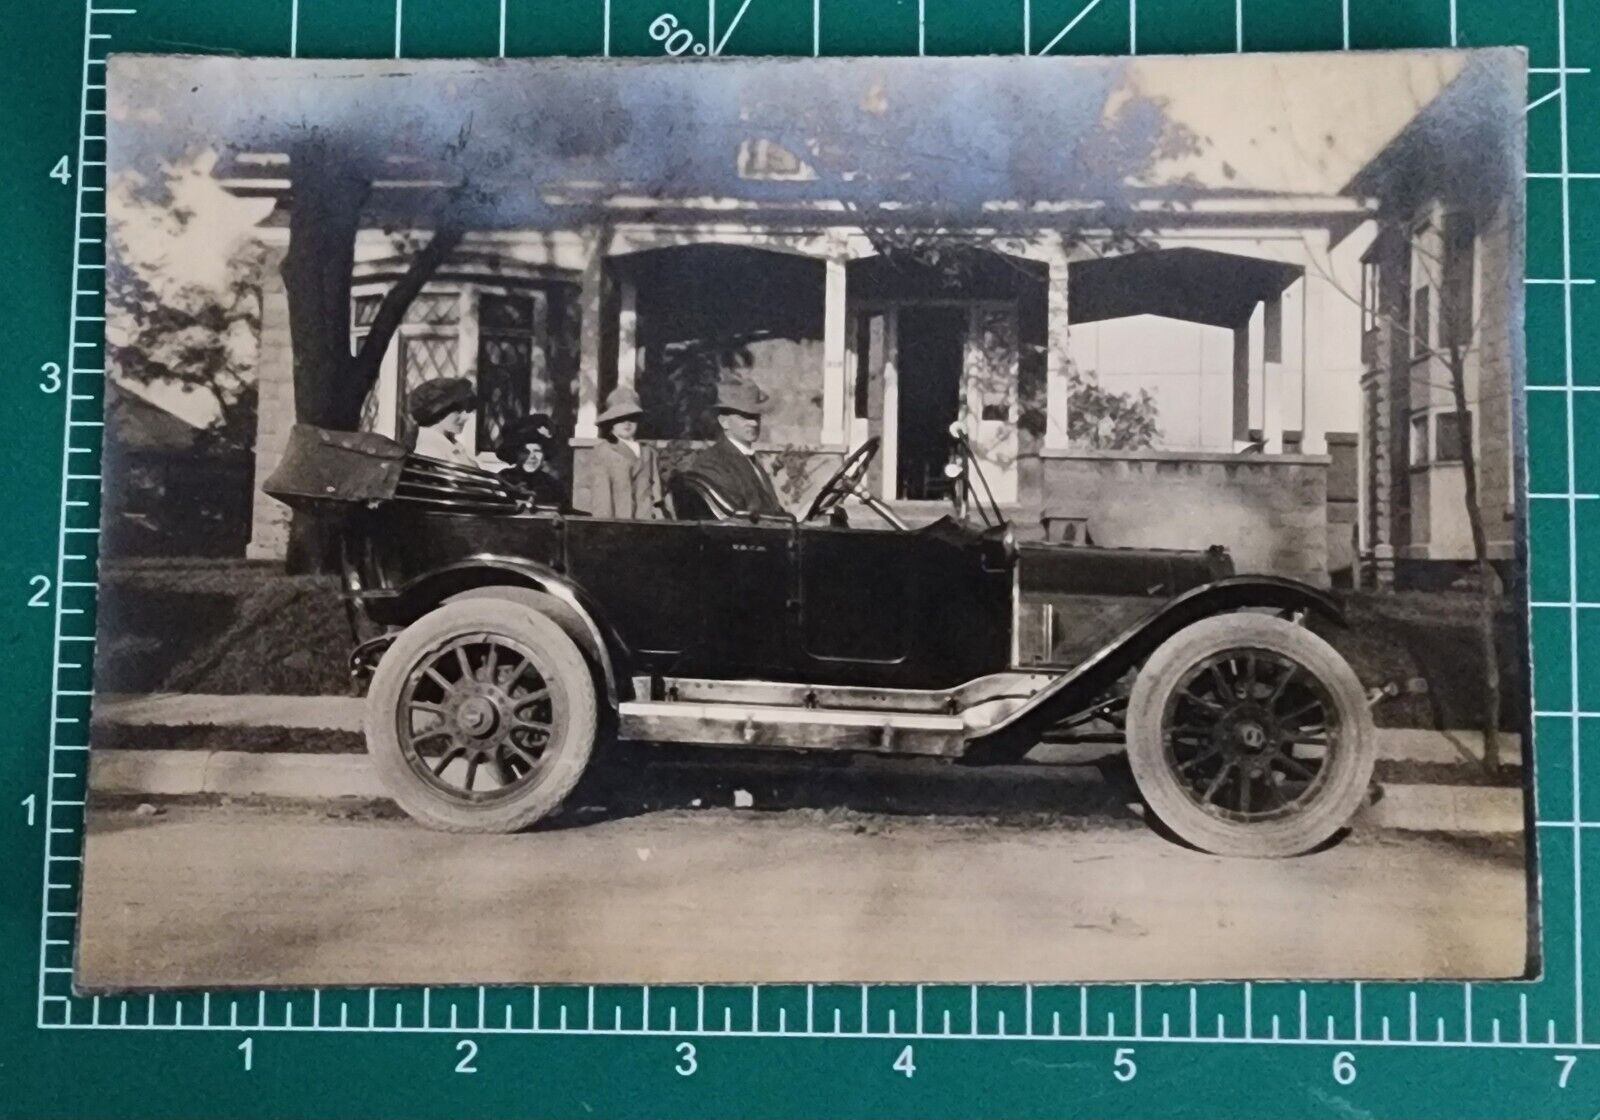 NEARLY 5X7 ANTIQUE CAR PHOTO Black And White Snapshot Vtg Model T? 1913 Oakland?